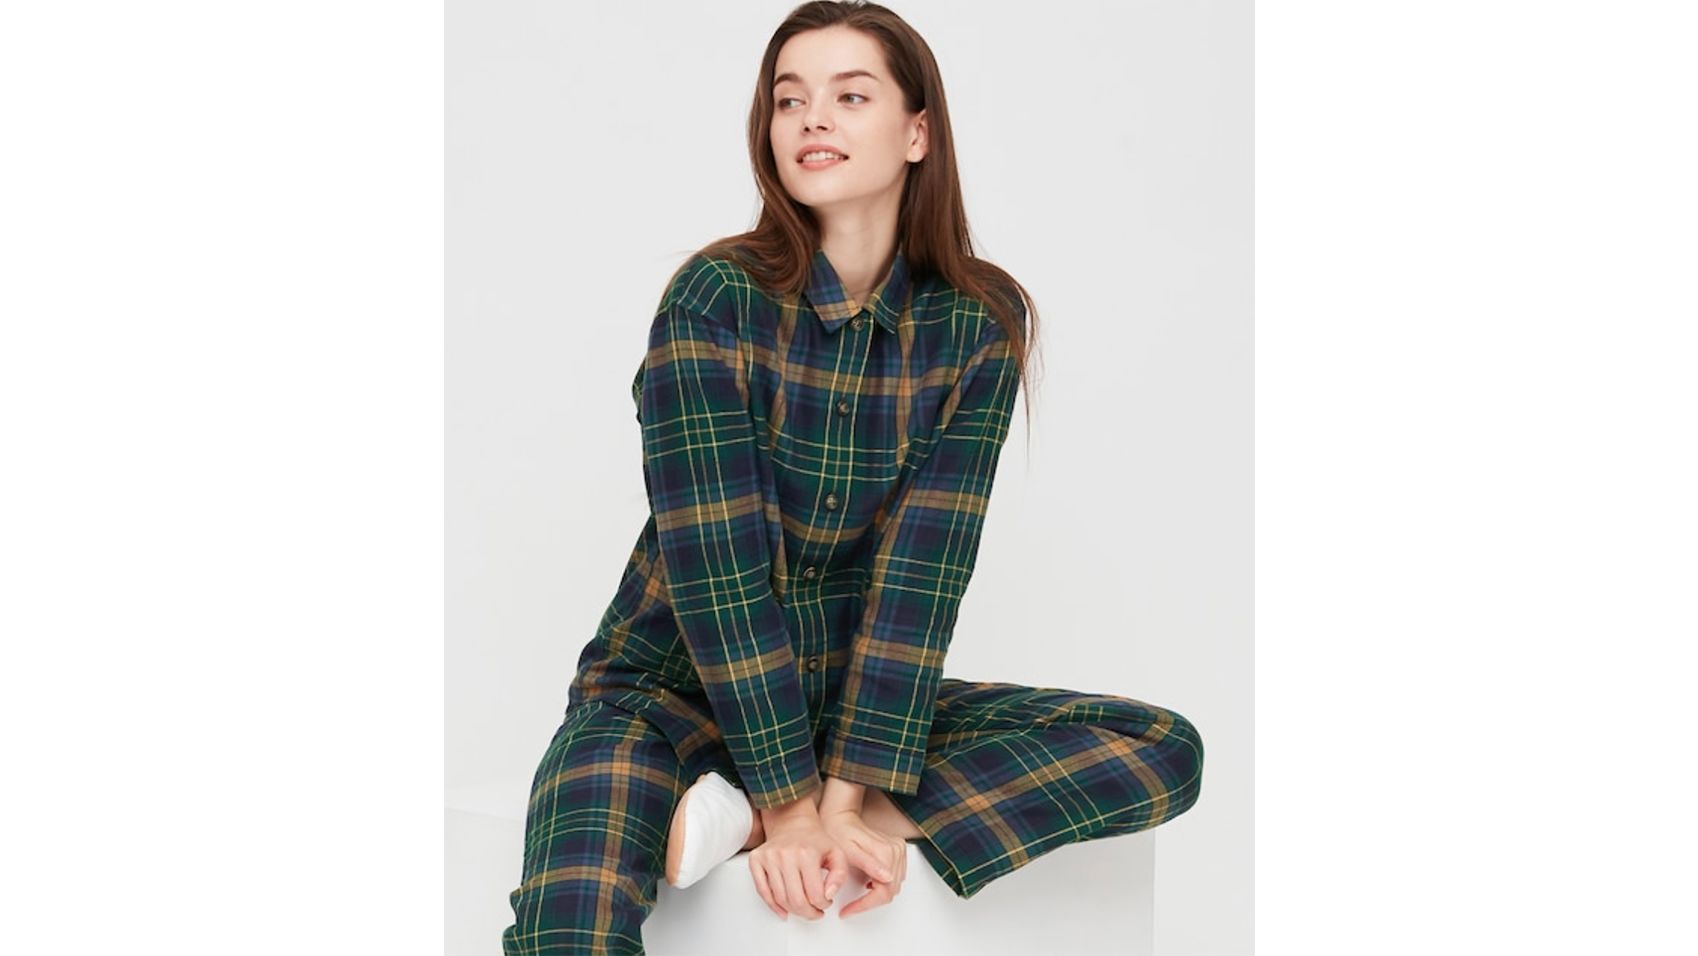 Macy's to Sell Gap Sleepwear and Intimates; Academy Adds L.L.Bean